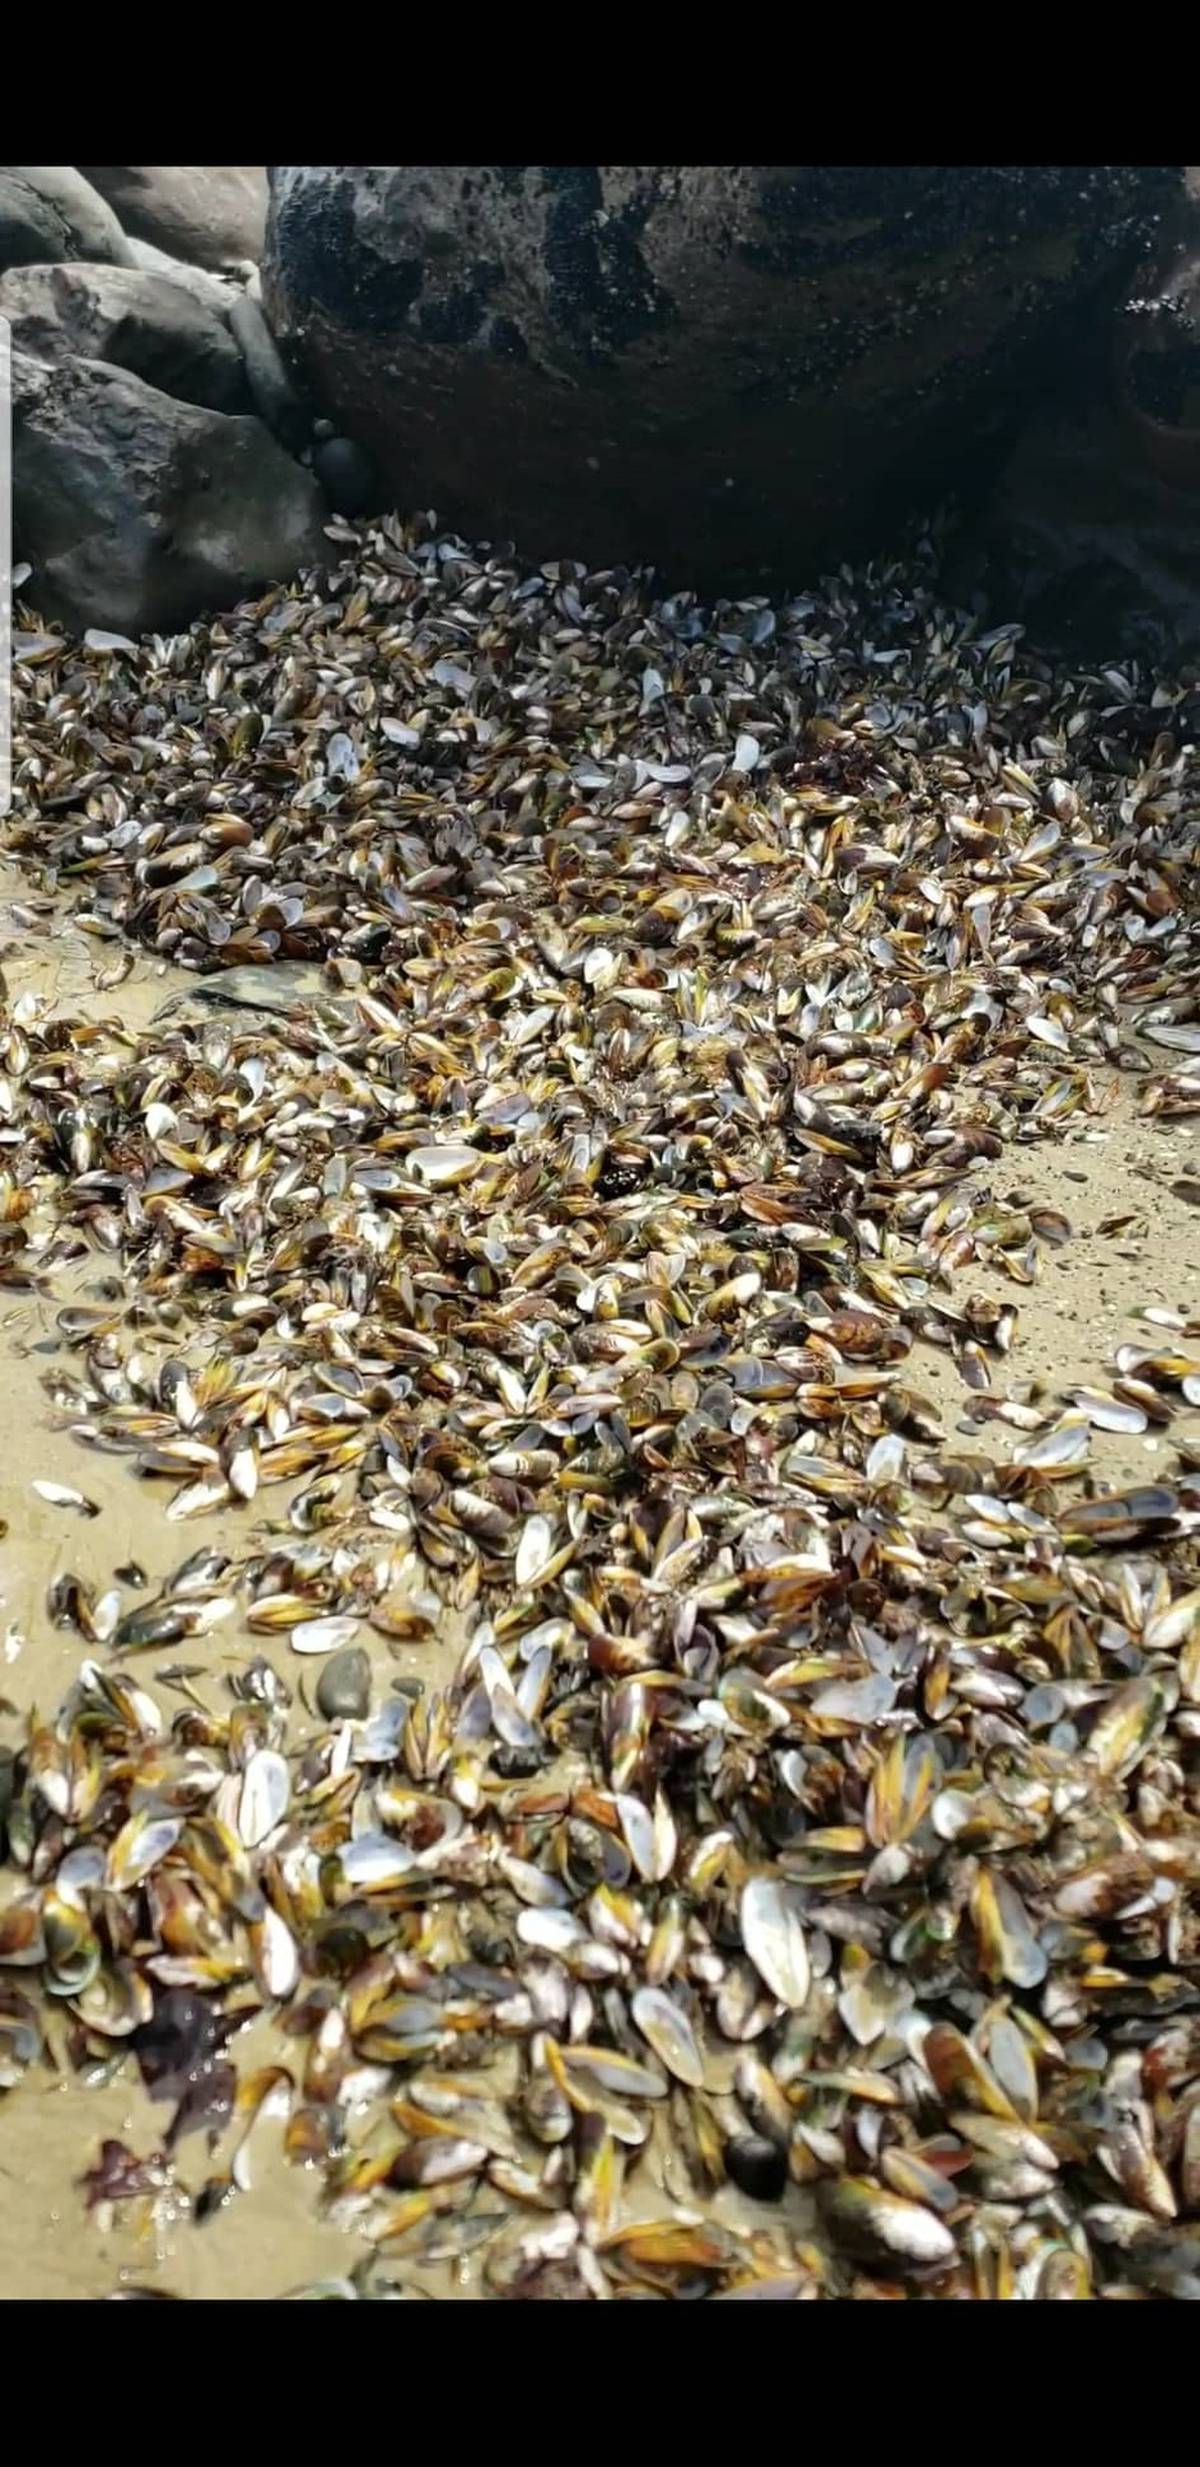 No evidence of toxins in Northland mass mussel deaths